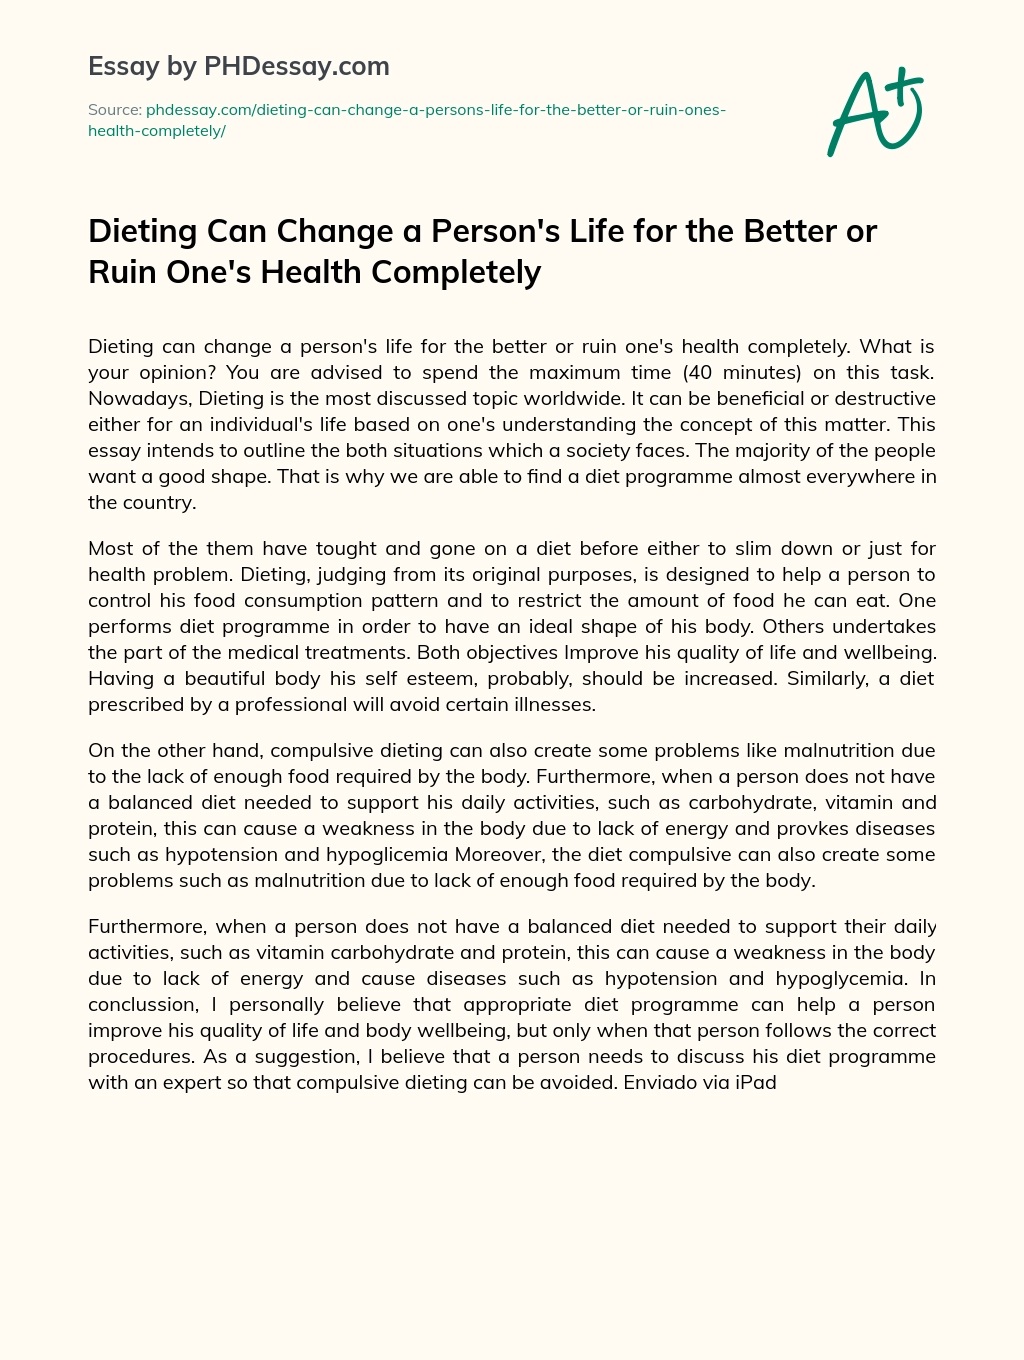 Dieting Can Change a Person’s Life for the Better or Ruin One’s Health Completely essay